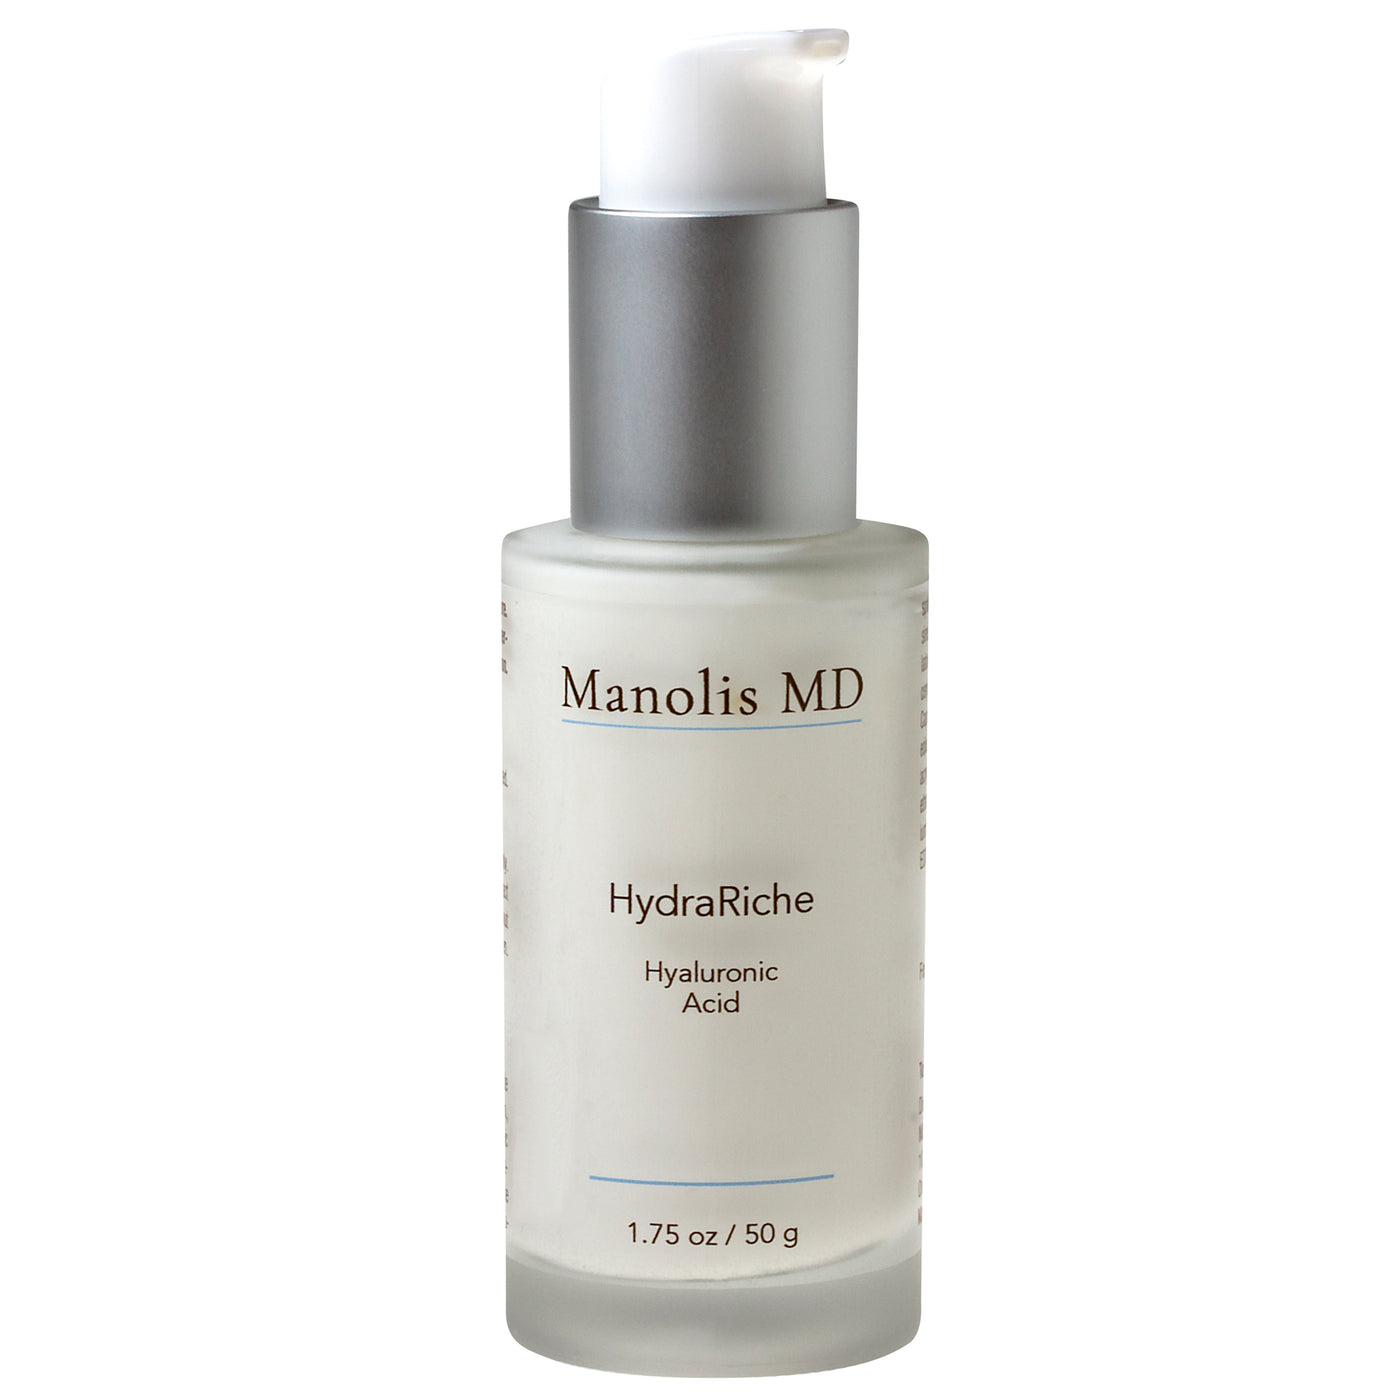 Our HydraRiche Moisturizer is a lightweight moisturizer that contains barrier replenishing lipids combined with the intense hydration of Hyaluronic acid